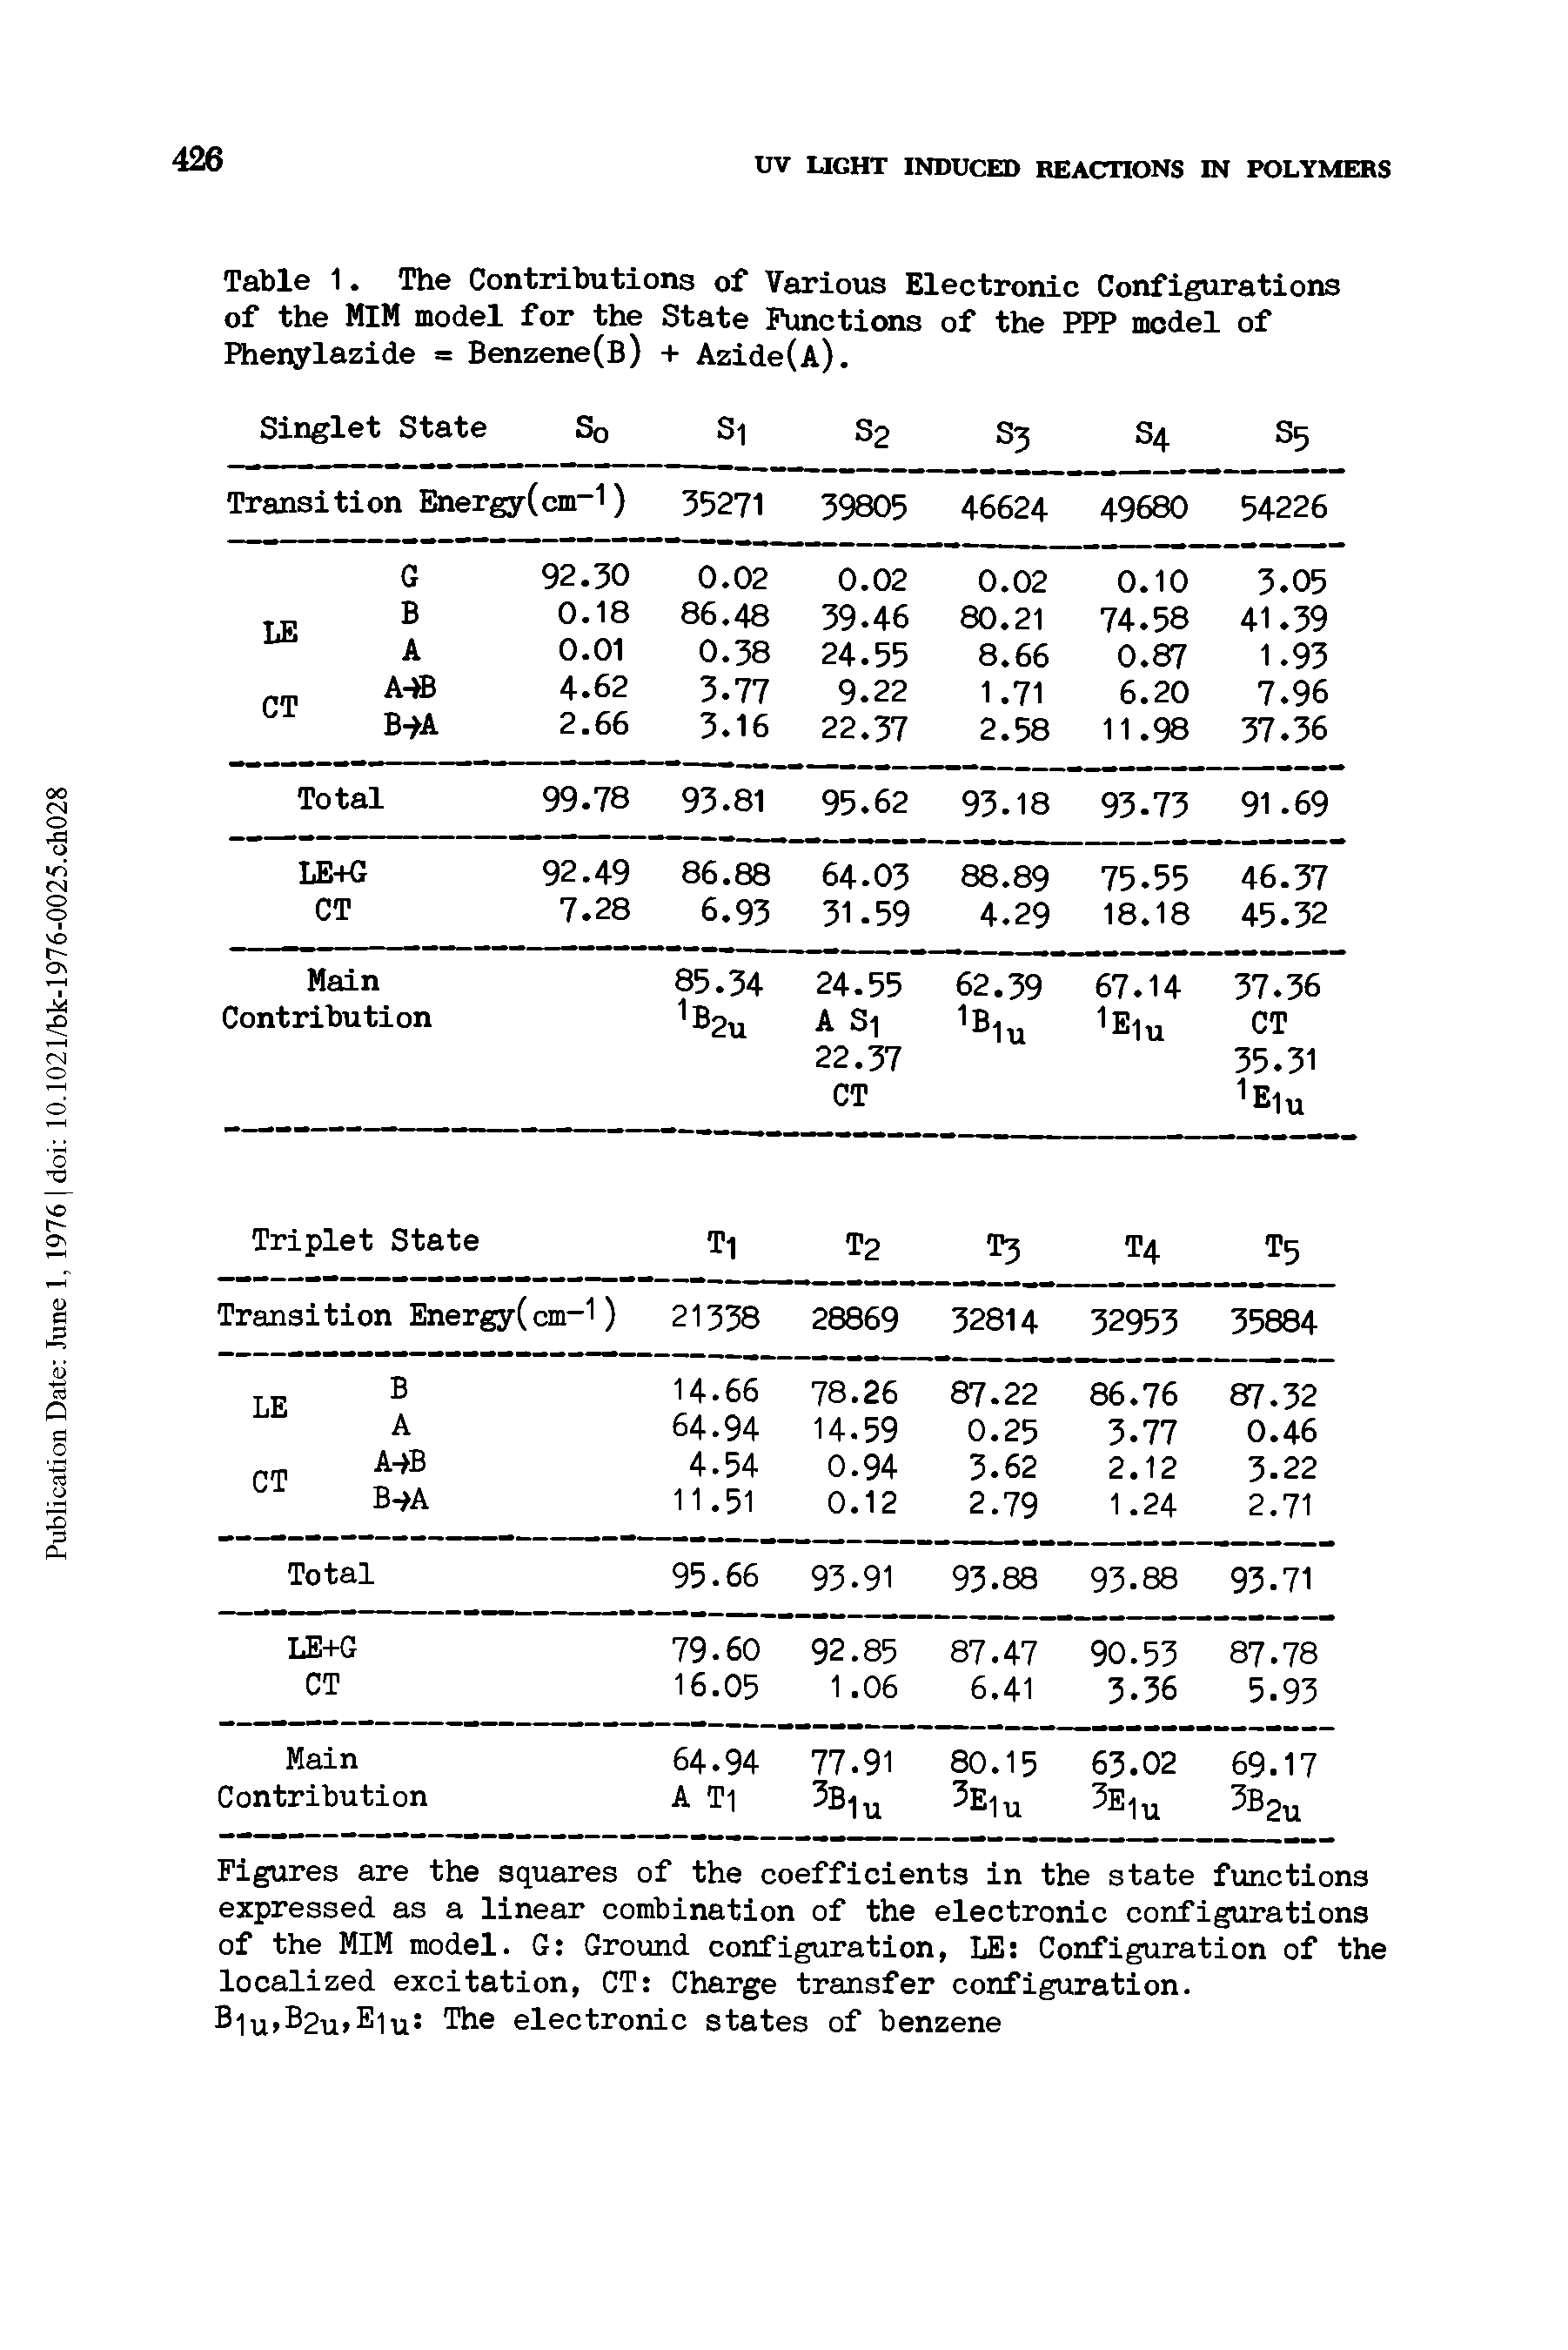 Figures are the squares of the coefficients in the state functions expressed as a linear combination of the electronic configurations of the MIM model. G Ground configuration, LE Configuration of the localized excitation, CT Charge transfer configuration. Biu>B2u Eiu The electronic states of benzene...